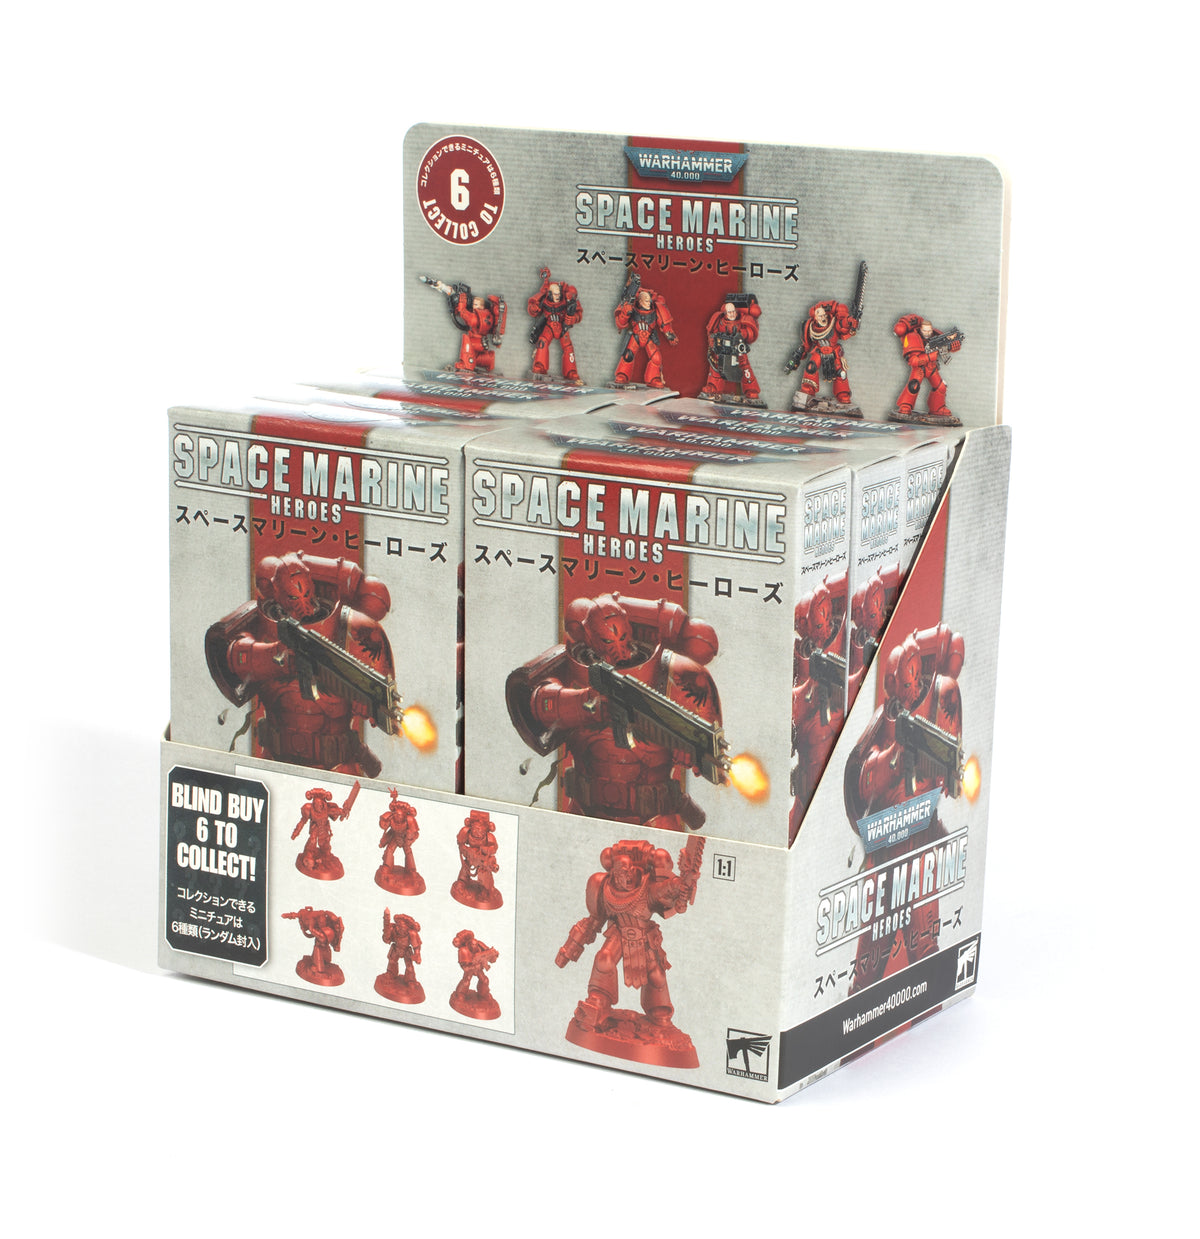 Space Marine Heroes 2022 – Blood Angels Collection One (Blind Buy Display of 8)